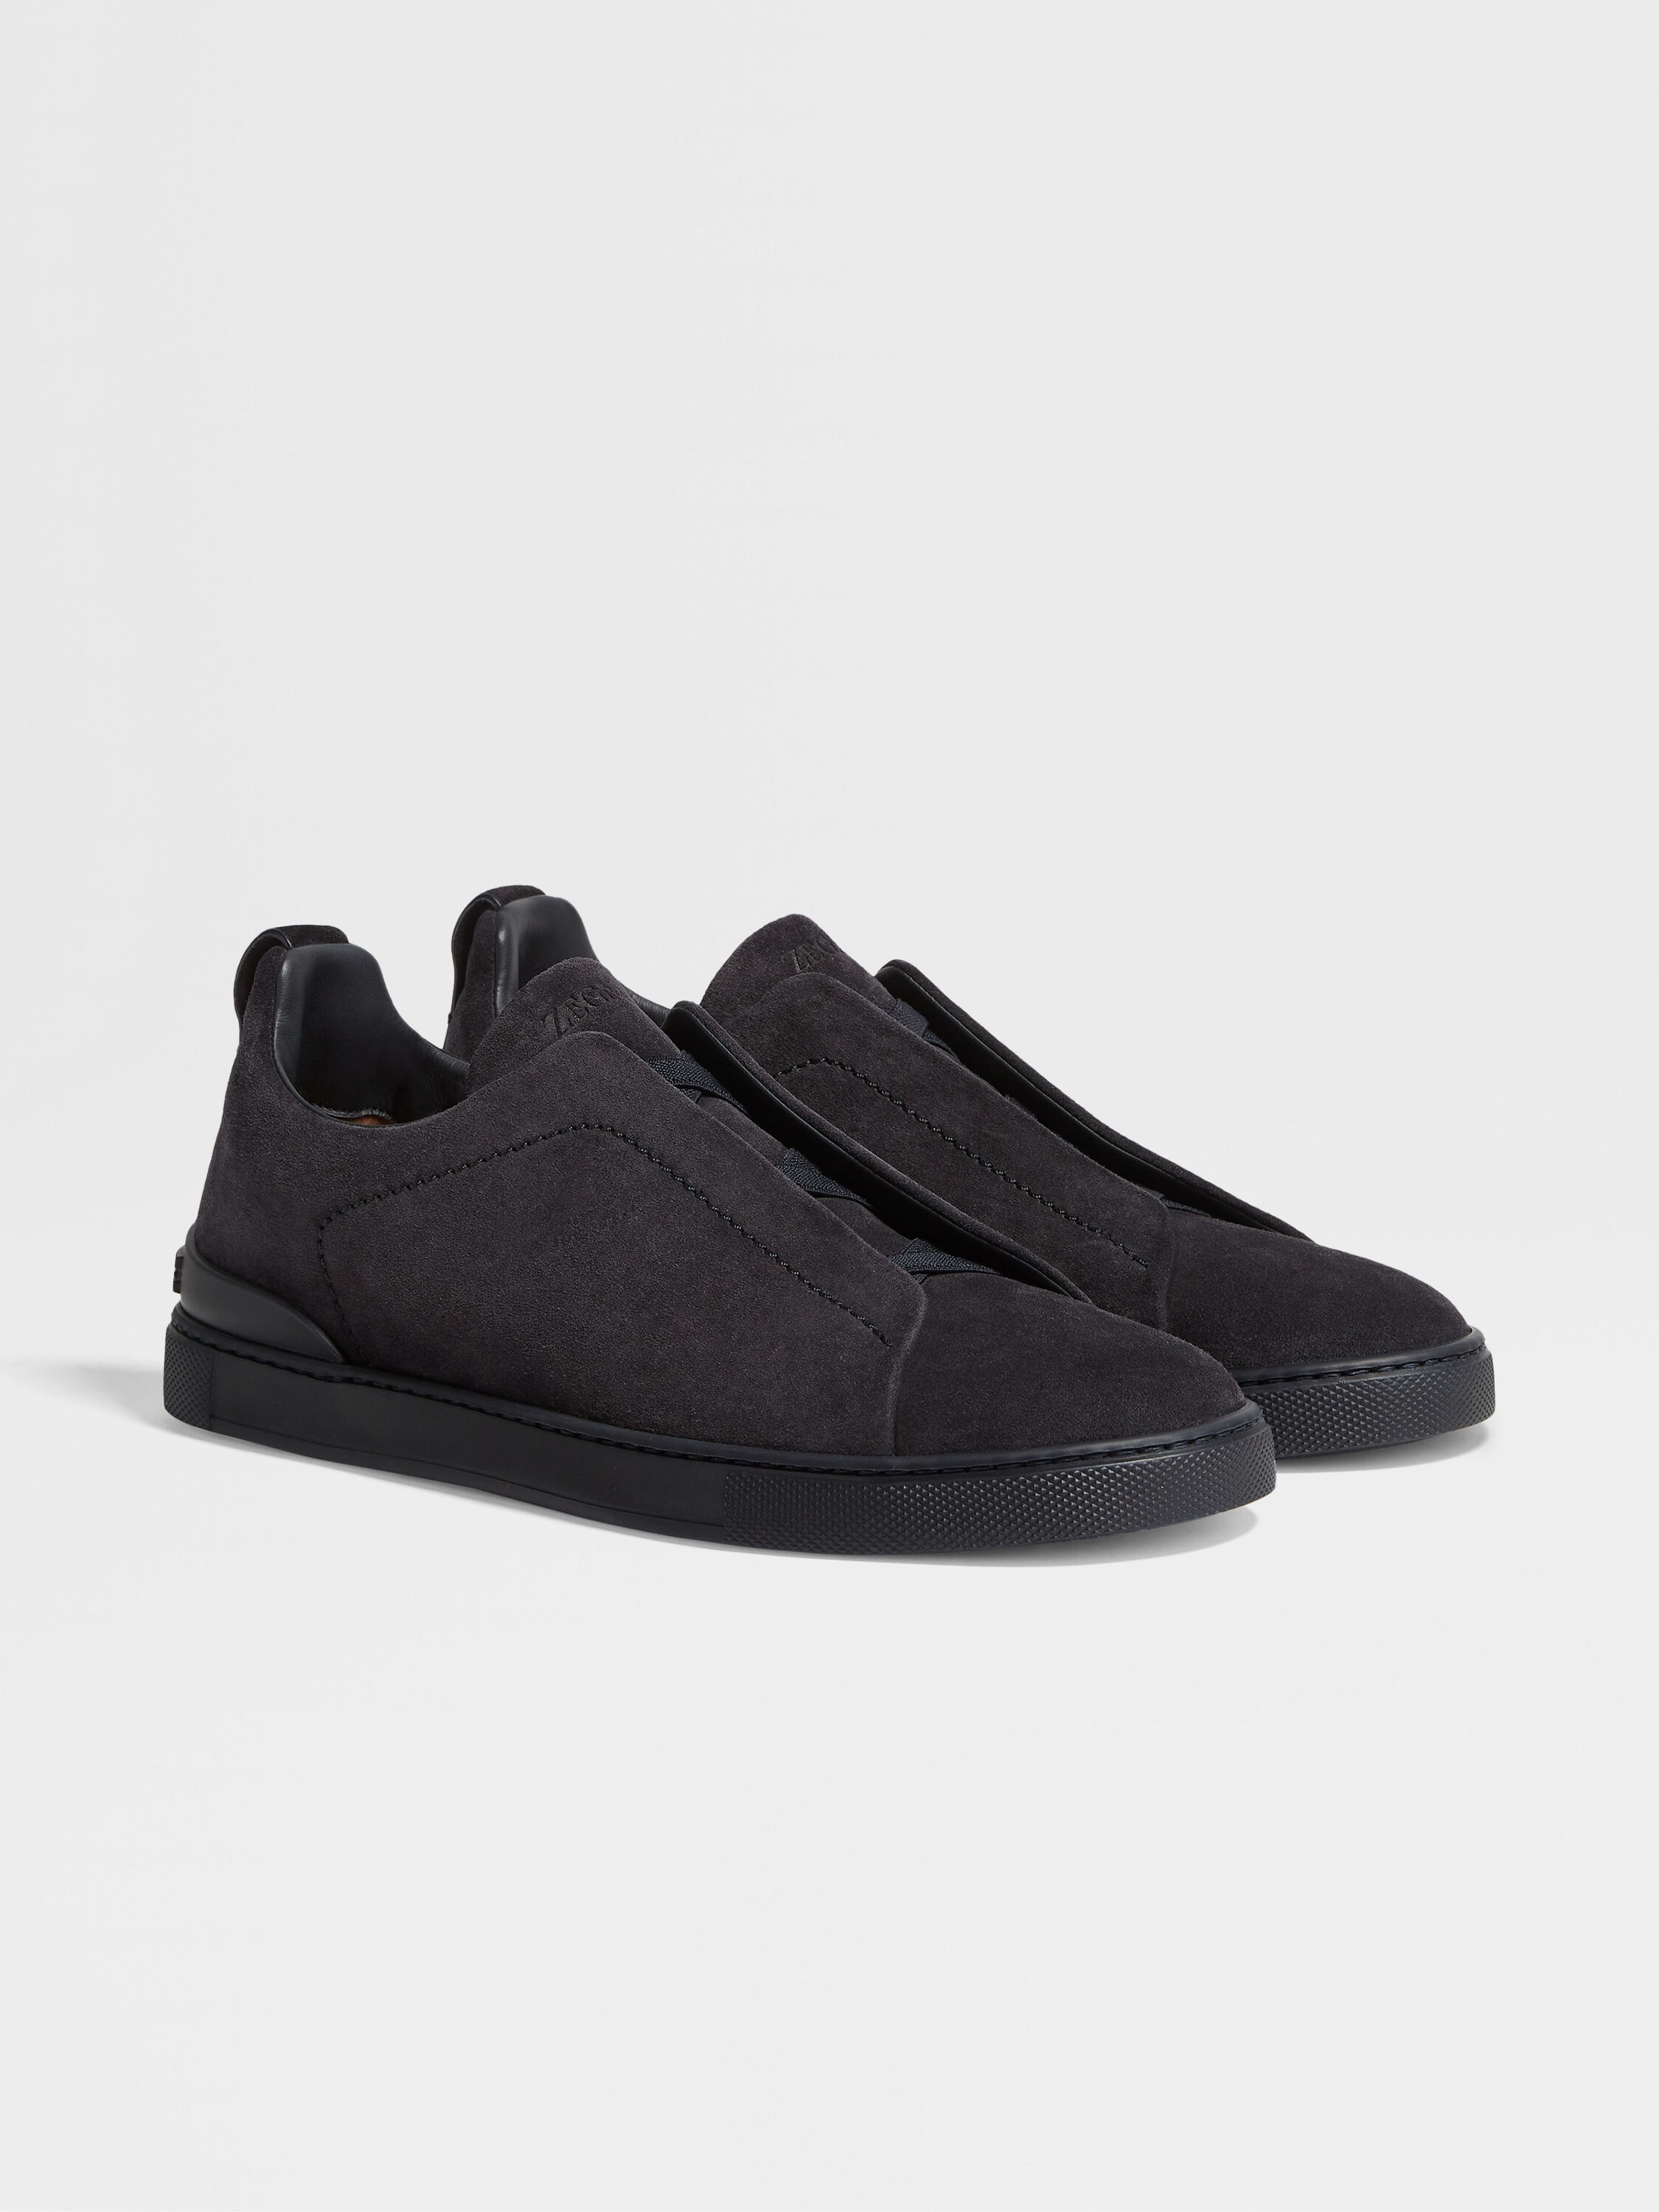 Tobacco Suede Triple Stitch™ Sneakers SS24 22365157 | Zegna JP